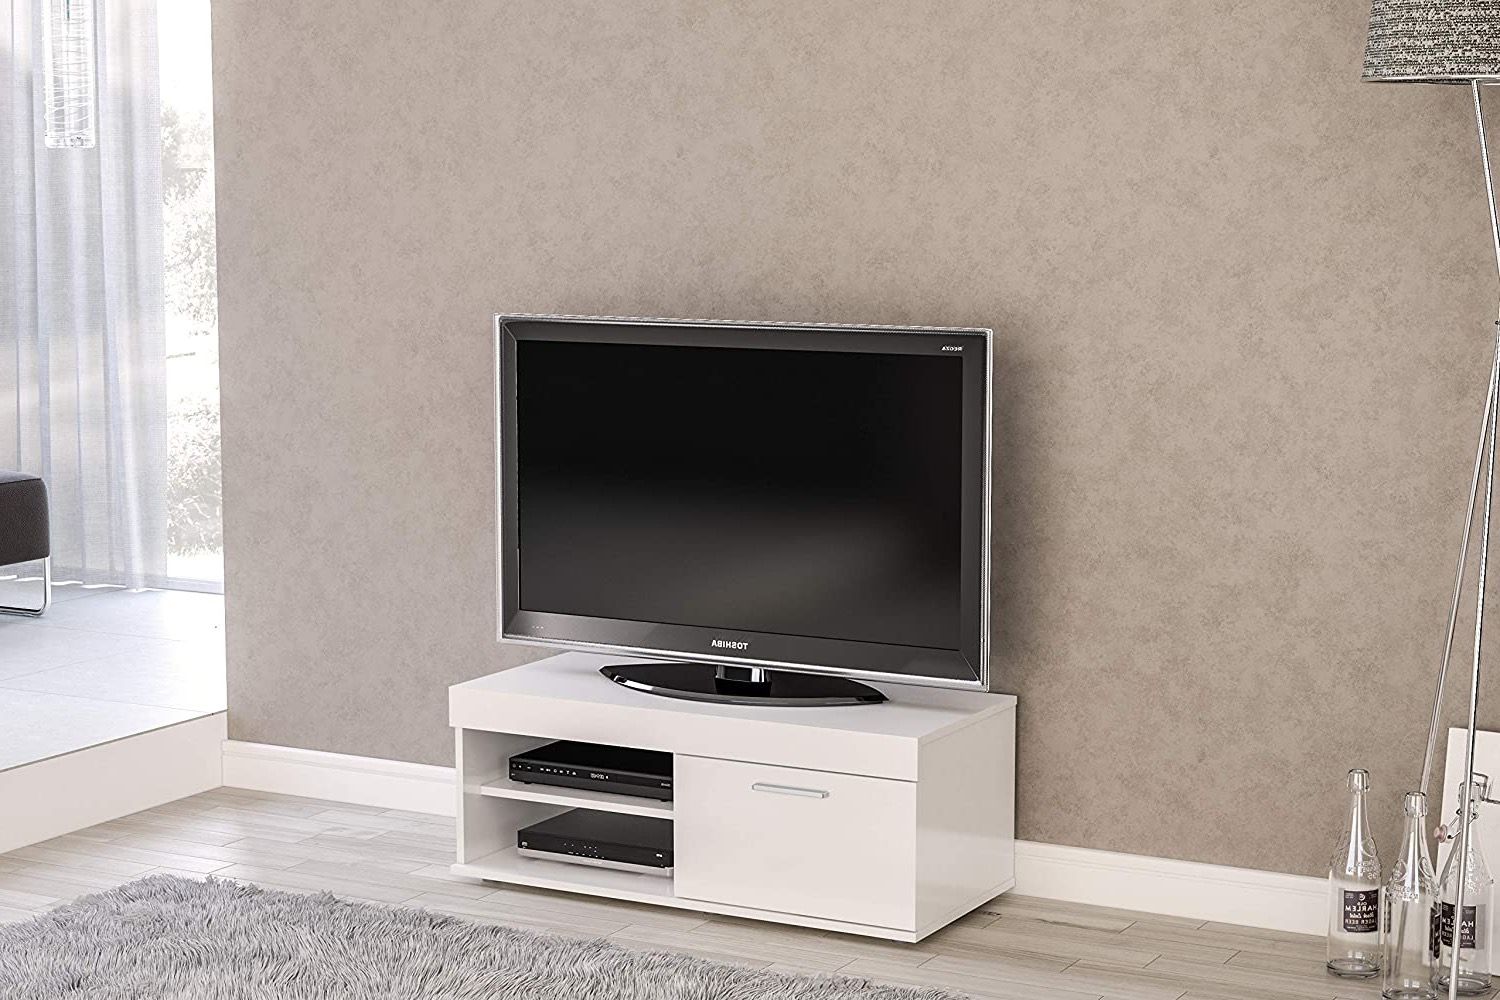 Edgeware Small Tv Stands (View 1 of 6)